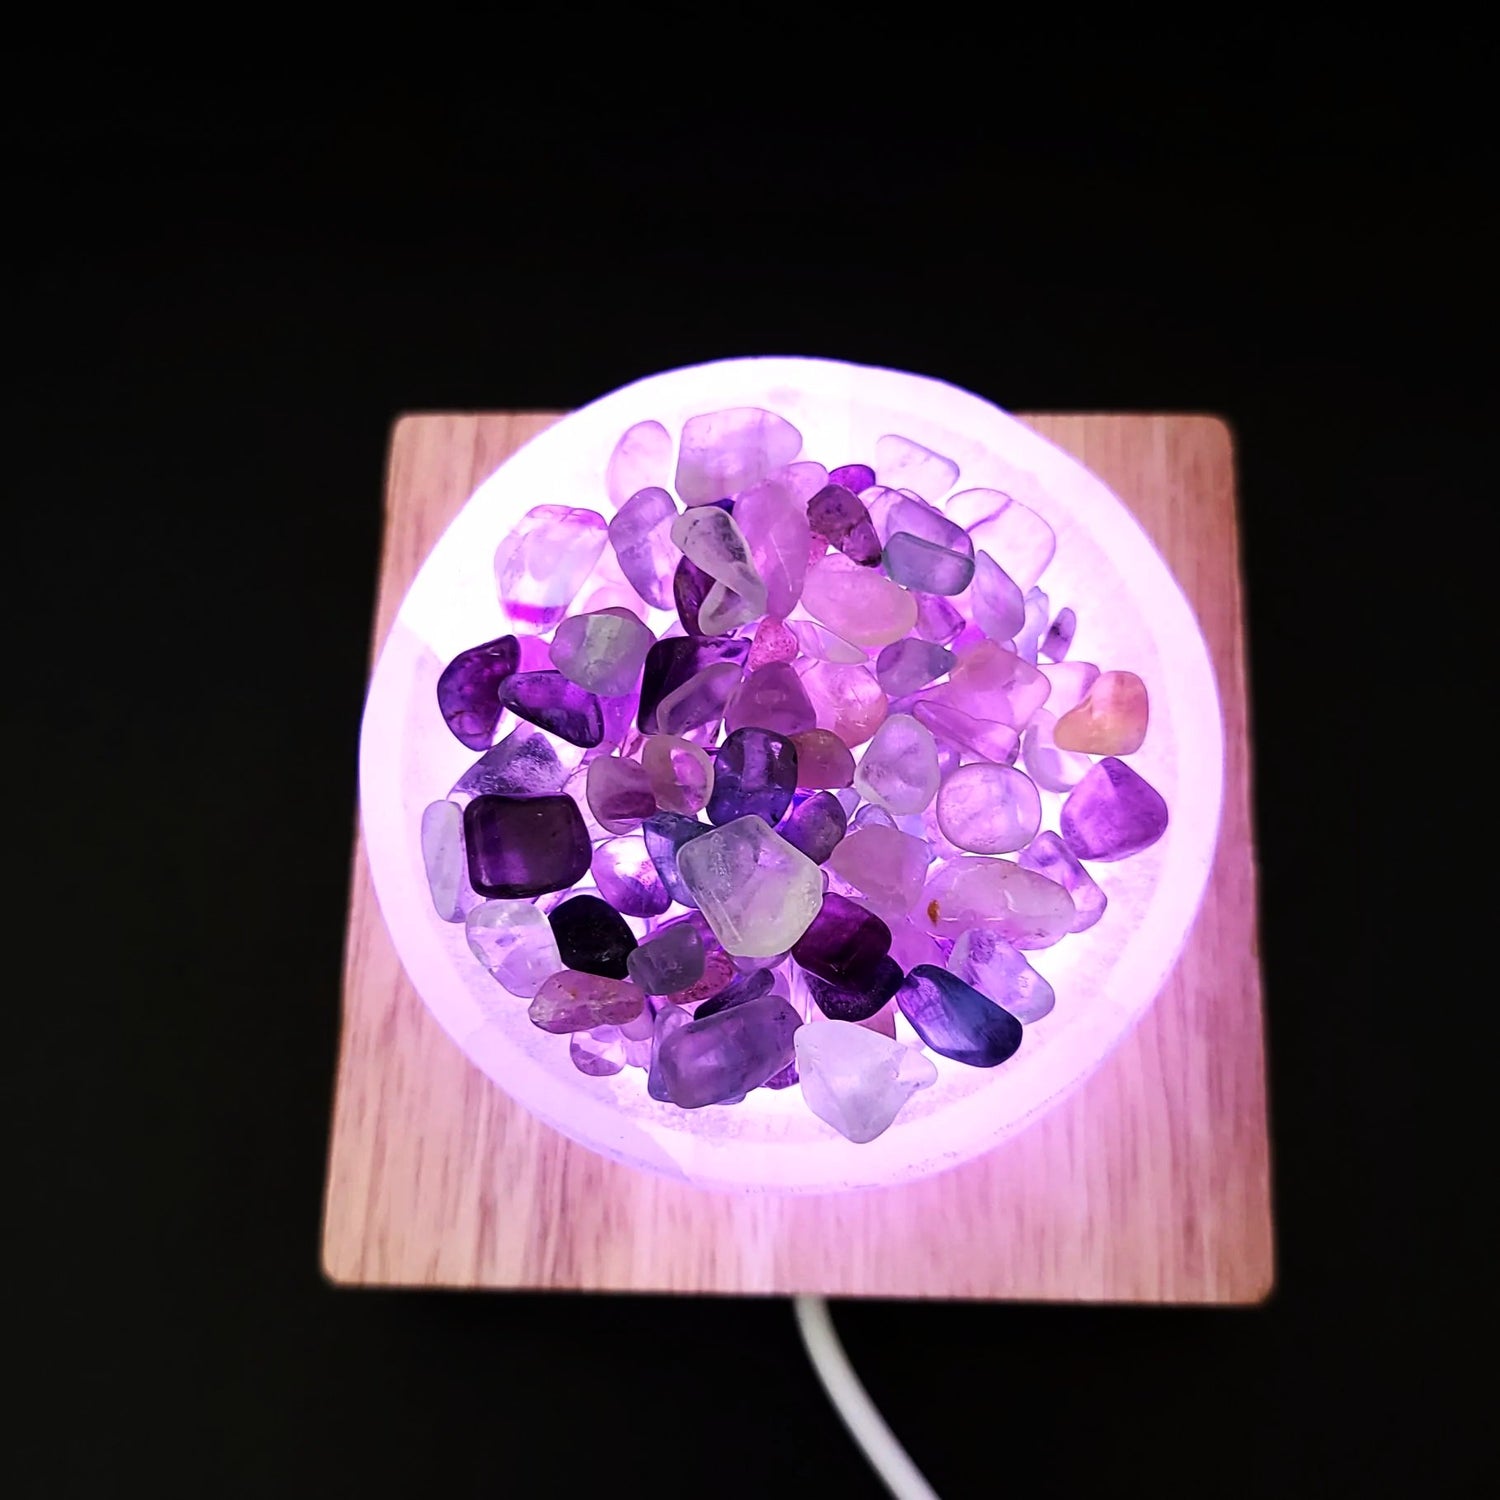 LED Light Wooden Square Base w/ Remote Control - Elevated Metaphysical